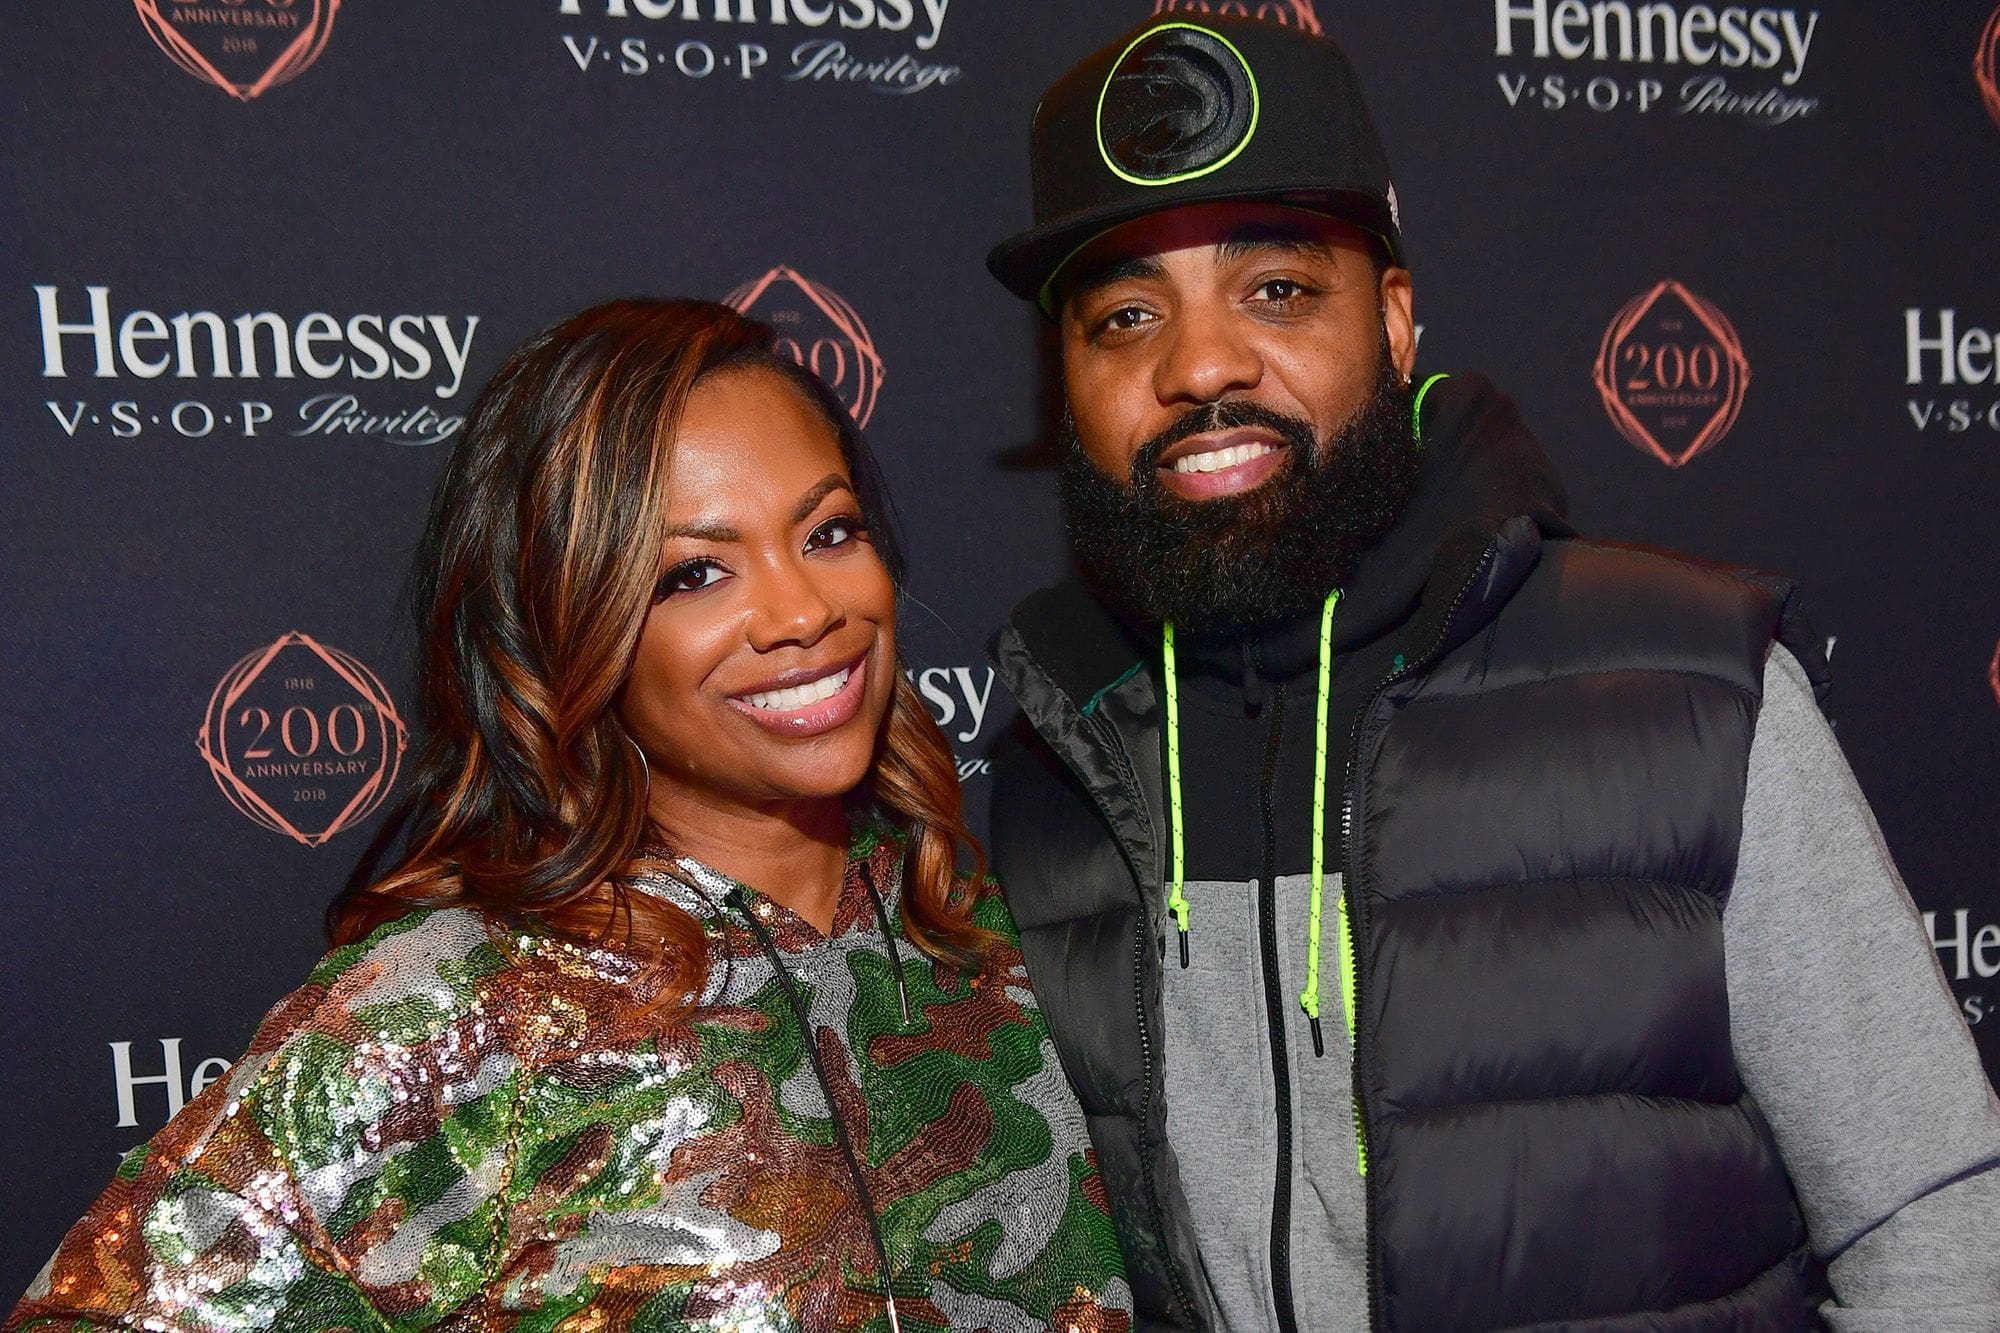 Kandi Burruss Praises Her Love For Todd Tucker - See Their Photos Together